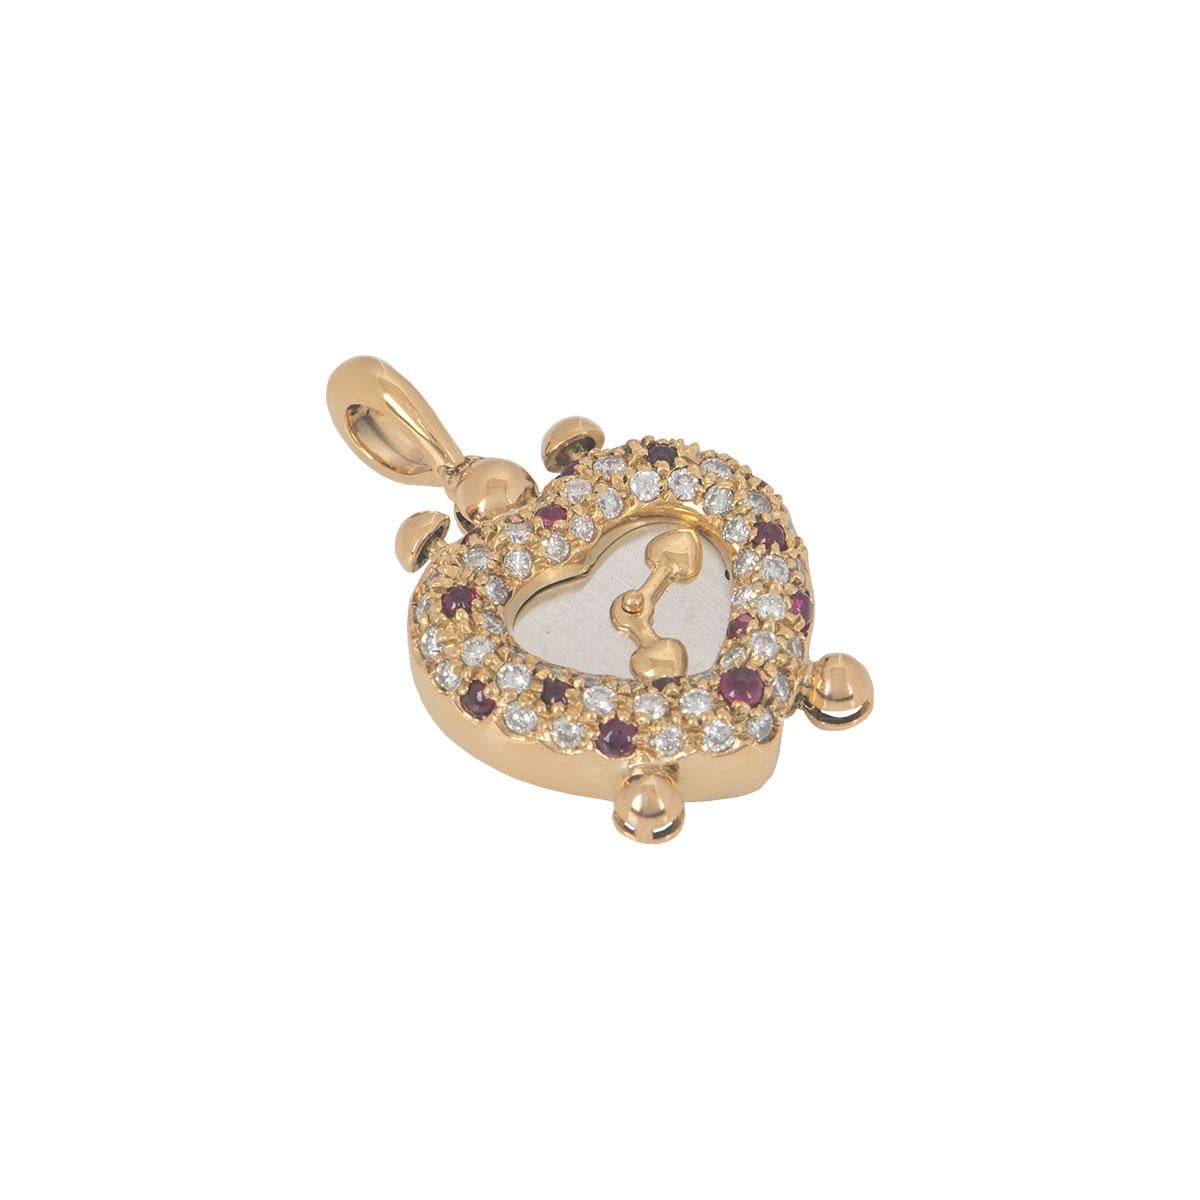 An 18k yellow gold diamond and ruby heart clock pendant. The pendant features a heart clock motif which has round brilliant cut diamonds and rubies in a pave setting alternating around the outer edge with a silver centre with gold clock hands. The